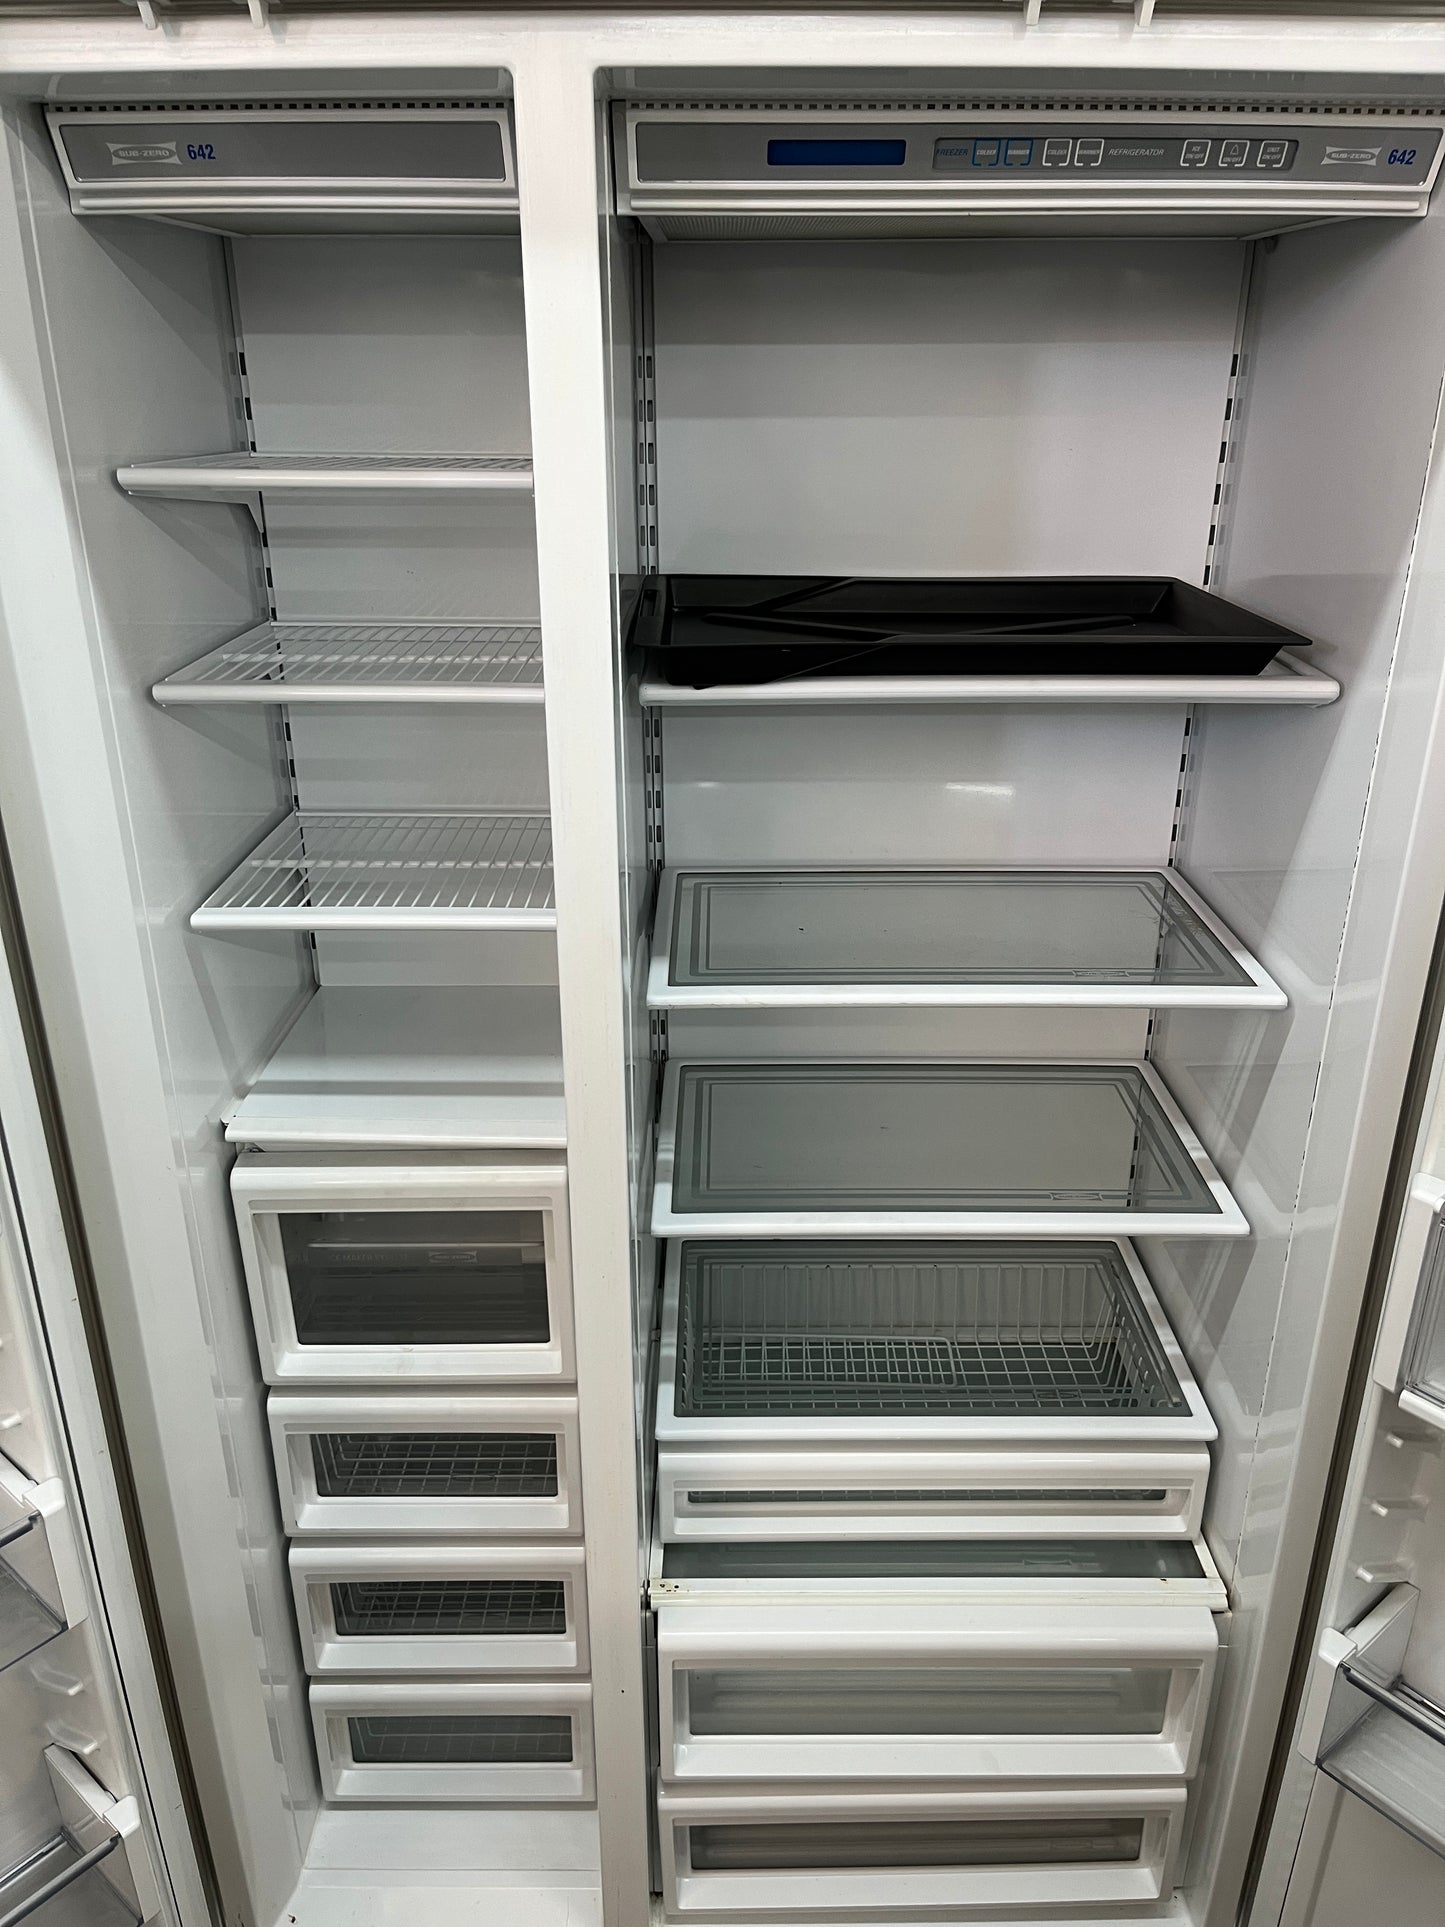 Subzero 42 Inch  642 Side By Side Built in Refrigerator in Stainless Steel 369178